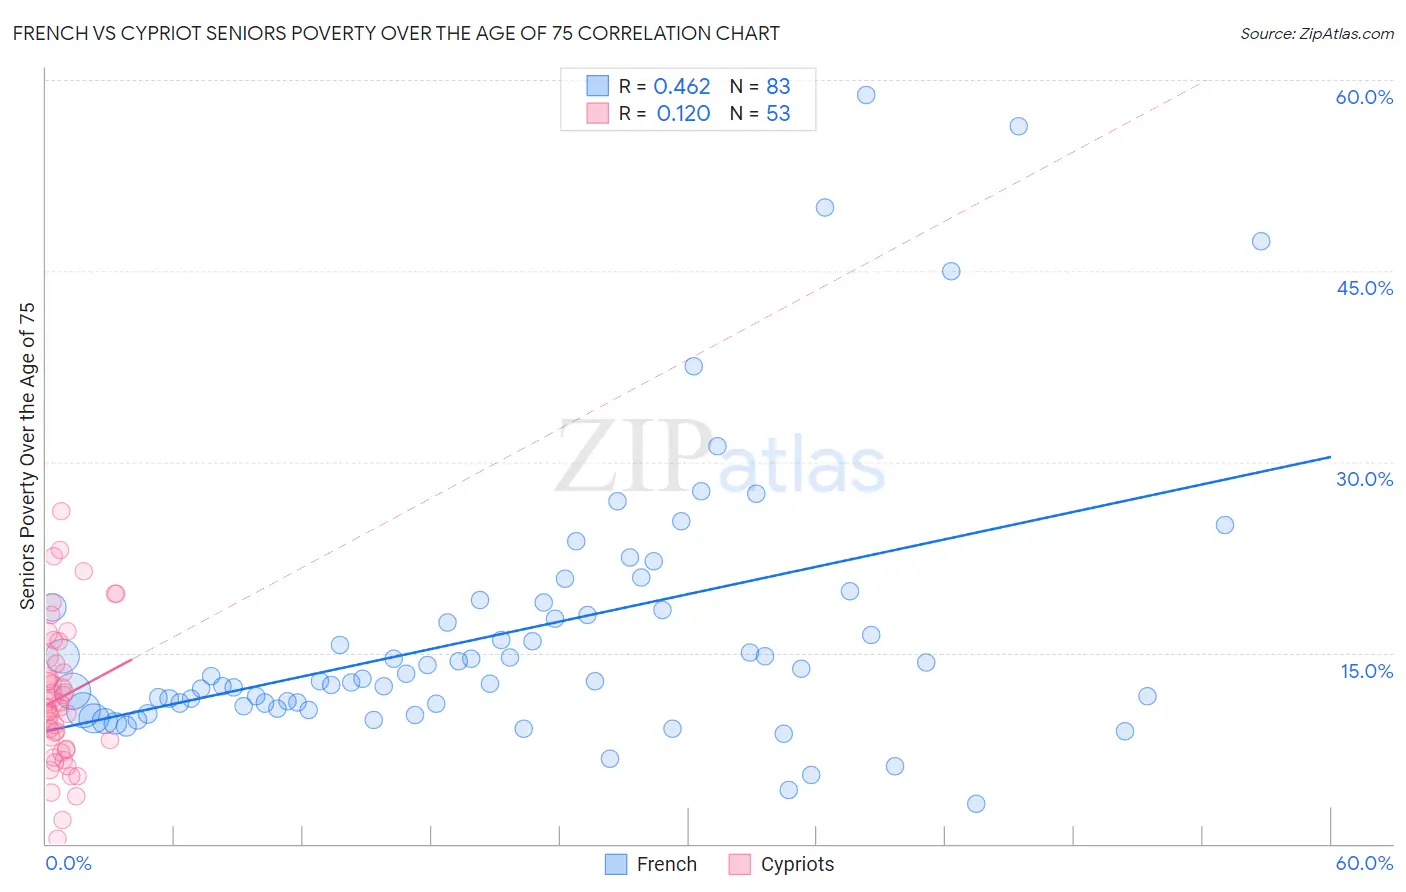 French vs Cypriot Seniors Poverty Over the Age of 75